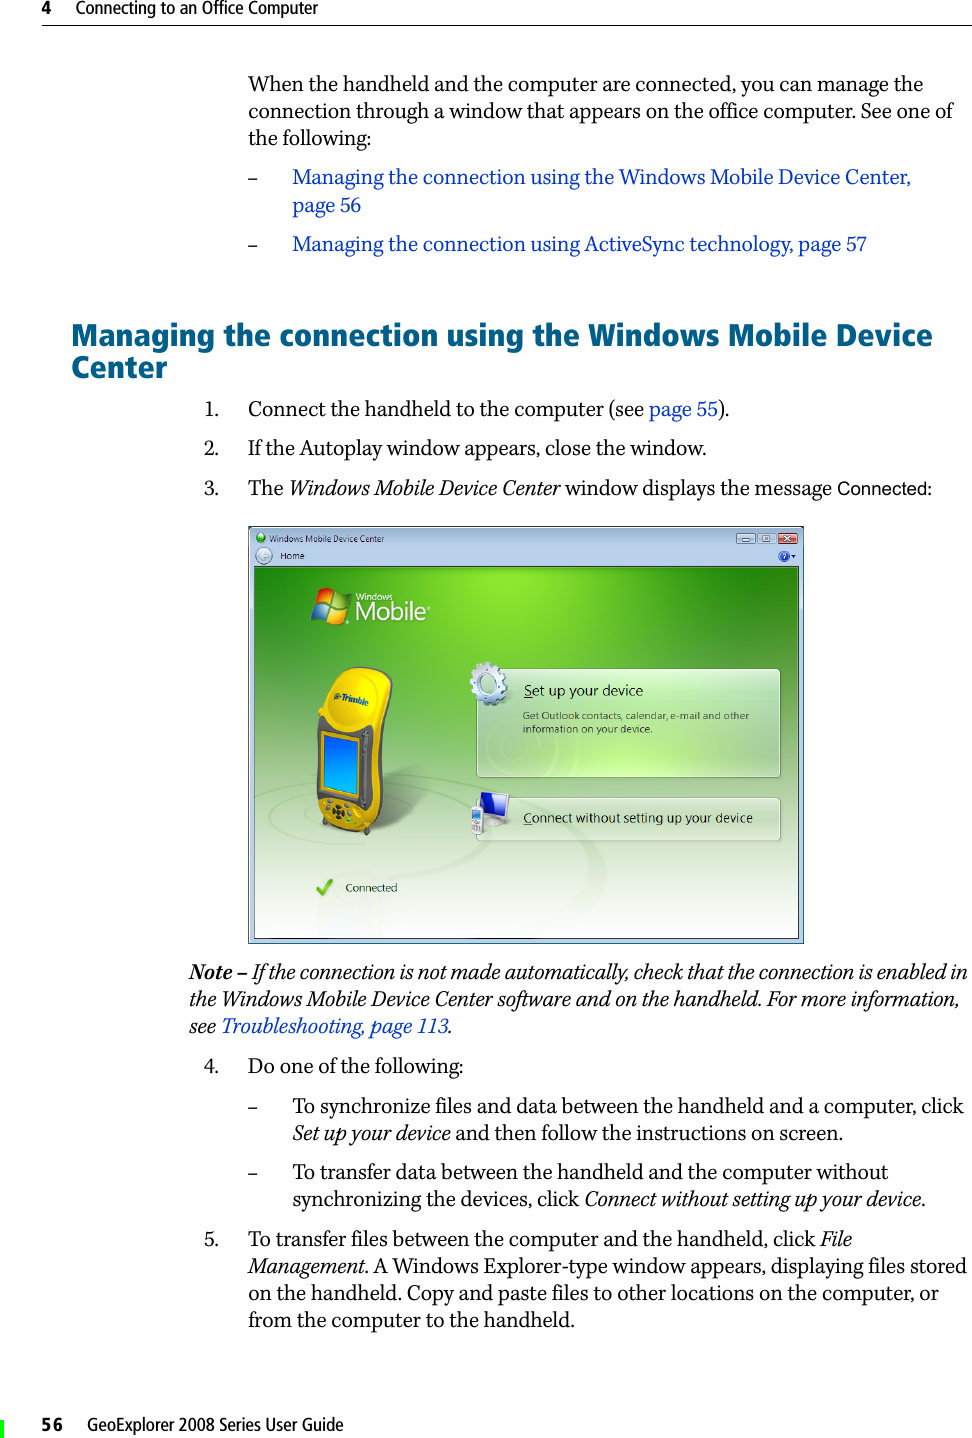 4     Connecting to an Office Computer56     GeoExplorer 2008 Series User GuideWhen the handheld and the computer are connected, you can manage the connection through a window that appears on the office computer. See one of the following: –Managing the connection using the Windows Mobile Device Center, page 56–Managing the connection using ActiveSync technology, page 57Managing the connection using the Windows Mobile Device Center1. Connect the handheld to the computer (see page 55). 2. If the Autoplay window appears, close the window.  3. The Windows Mobile Device Center window displays the message Connected:  Note – If the connection is not made automatically, check that the connection is enabled in the Windows Mobile Device Center software and on the handheld. For more information, see Troubleshooting, page 113.4. Do one of the following:–To synchronize files and data between the handheld and a computer, click Set up your device and then follow the instructions on screen. –To transfer data between the handheld and the computer without synchronizing the devices, click Connect without setting up your device.5. To transfer files between the computer and the handheld, click File Management. A Windows Explorer-type window appears, displaying files stored on the handheld. Copy and paste files to other locations on the computer, or from the computer to the handheld.